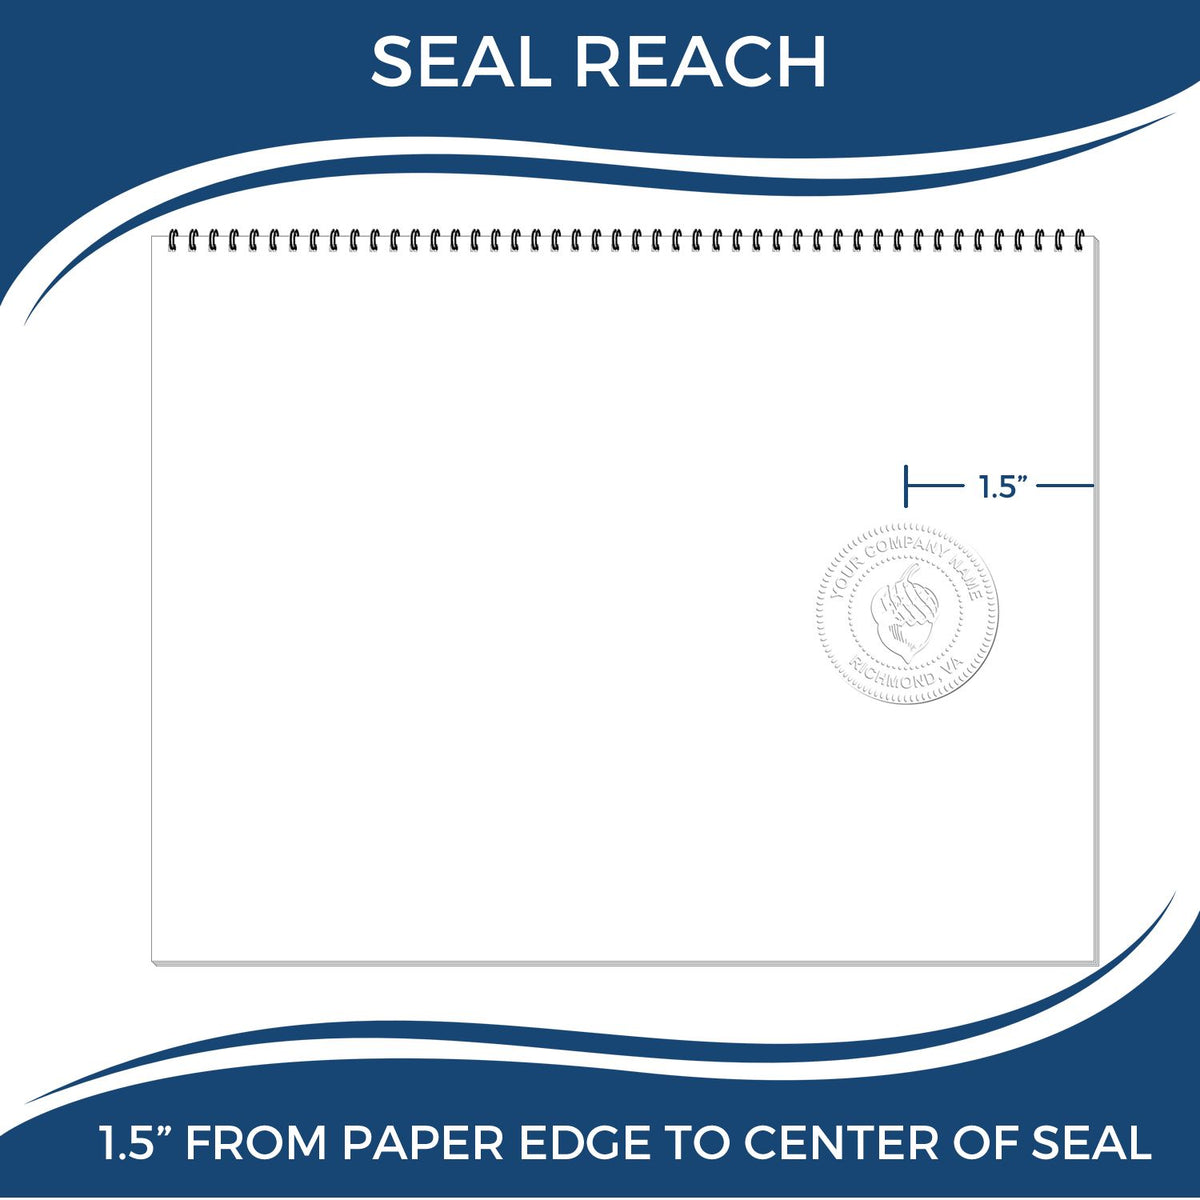 An infographic showing the seal reach which is represented by a ruler and a miniature seal image of the Hybrid Rhode Island Land Surveyor Seal